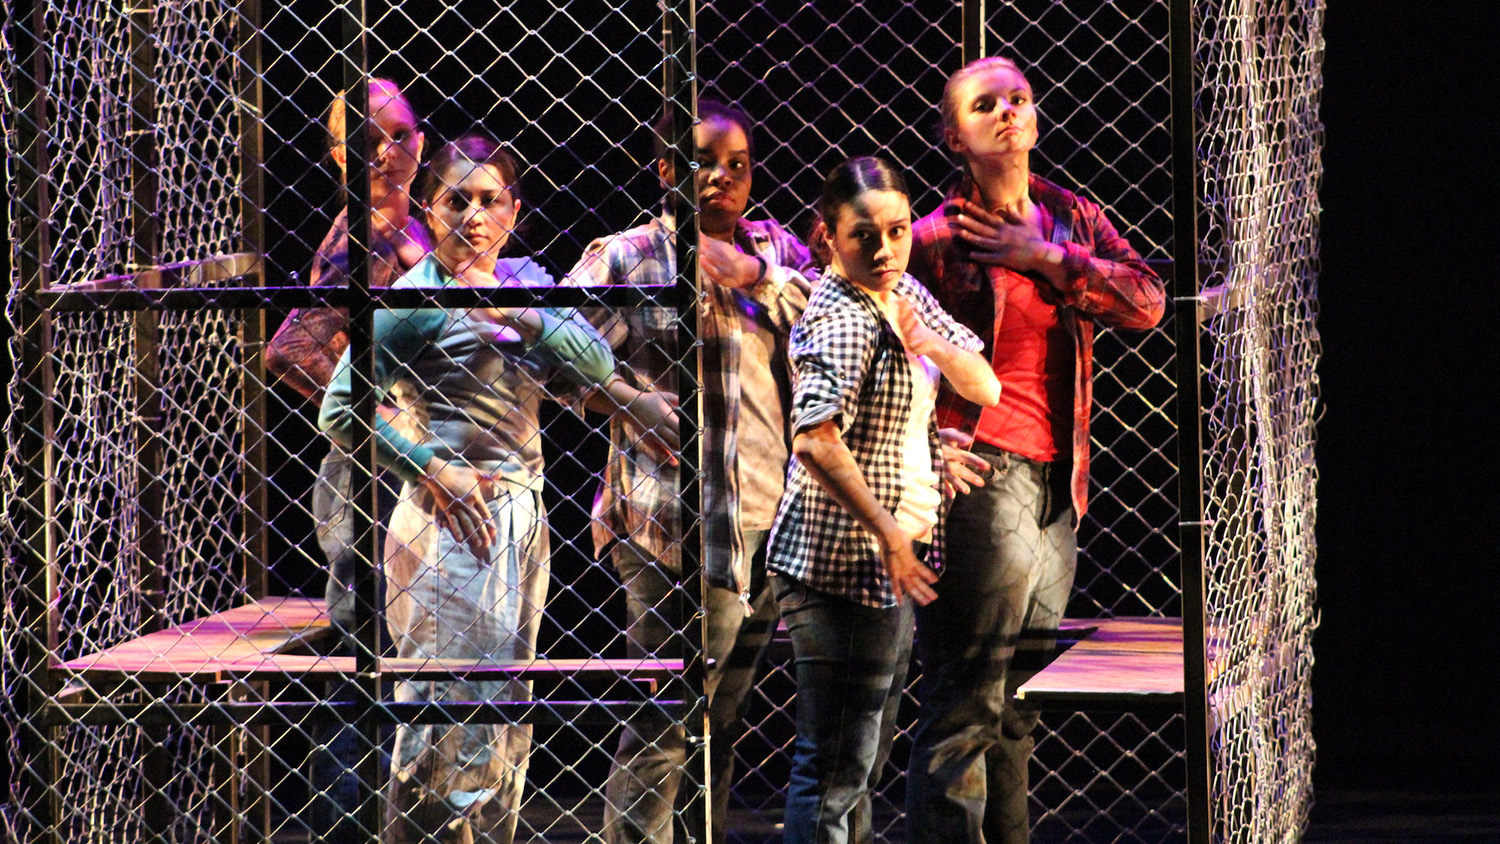 As part of Christa Oliver's production, "Posture of the Heart," several migrant women are seen in a holding cell.